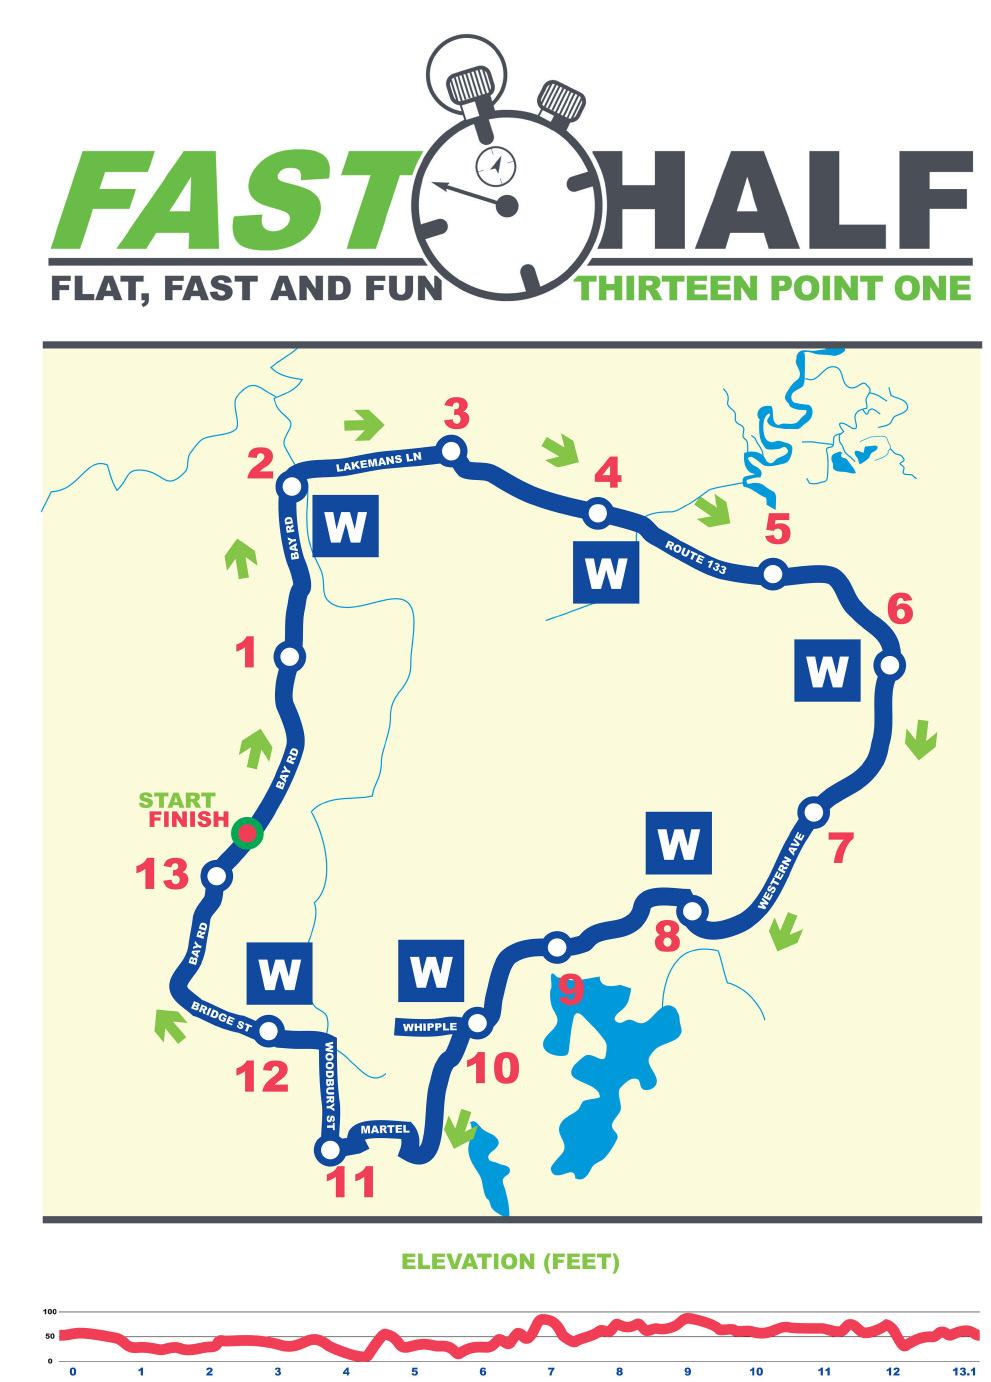 The Building Center Fast Half Courses will be clearly marked with arrow signs and mile markers RACE Local police will provide race support on the course.